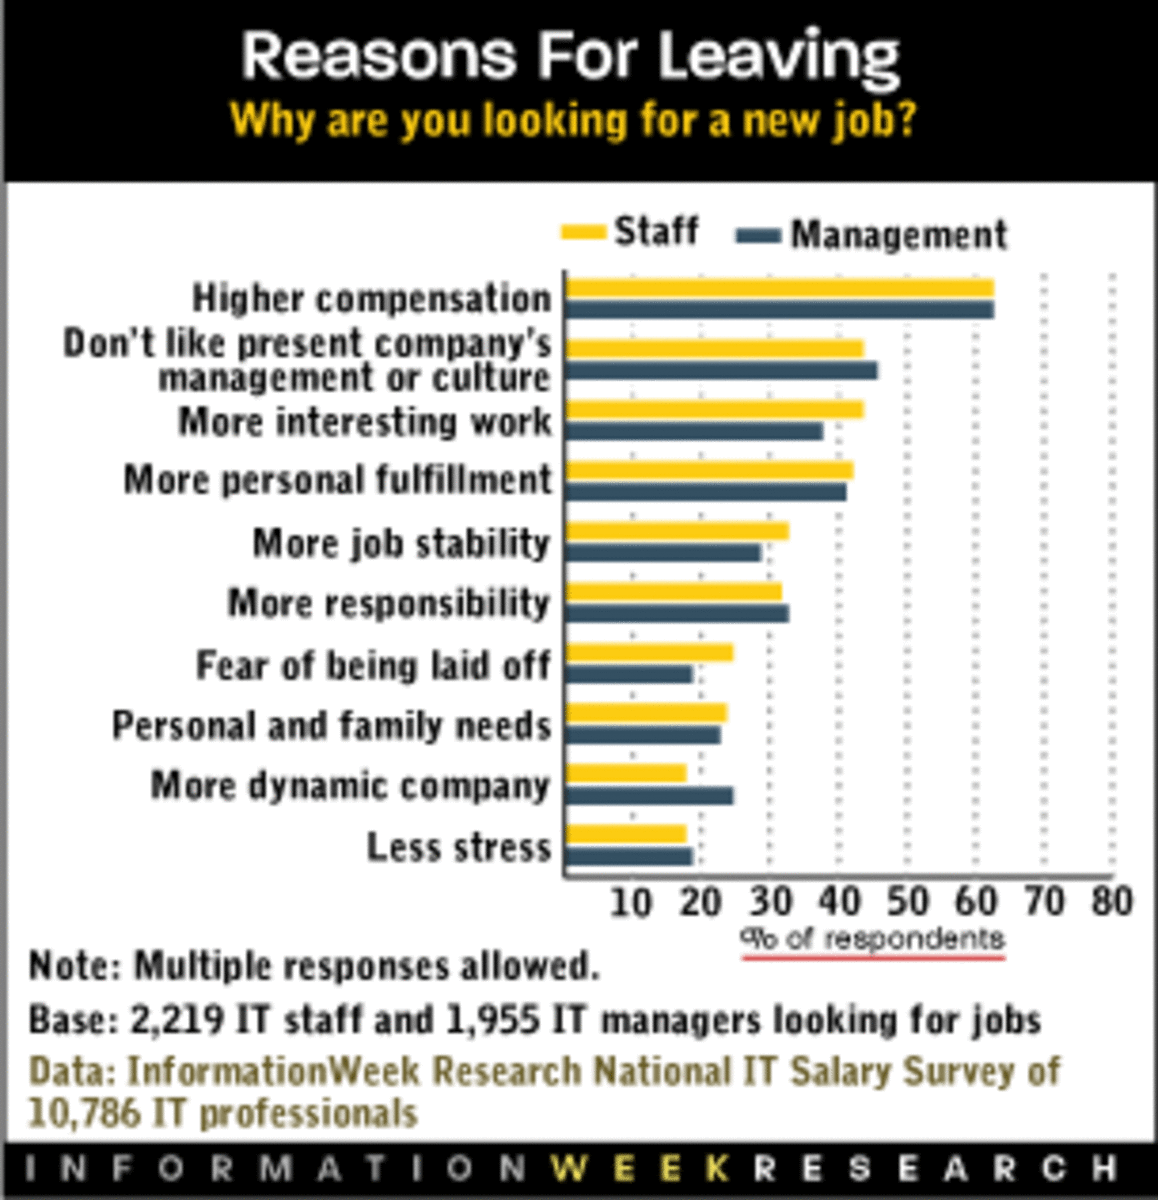 Good reasons to leave current job